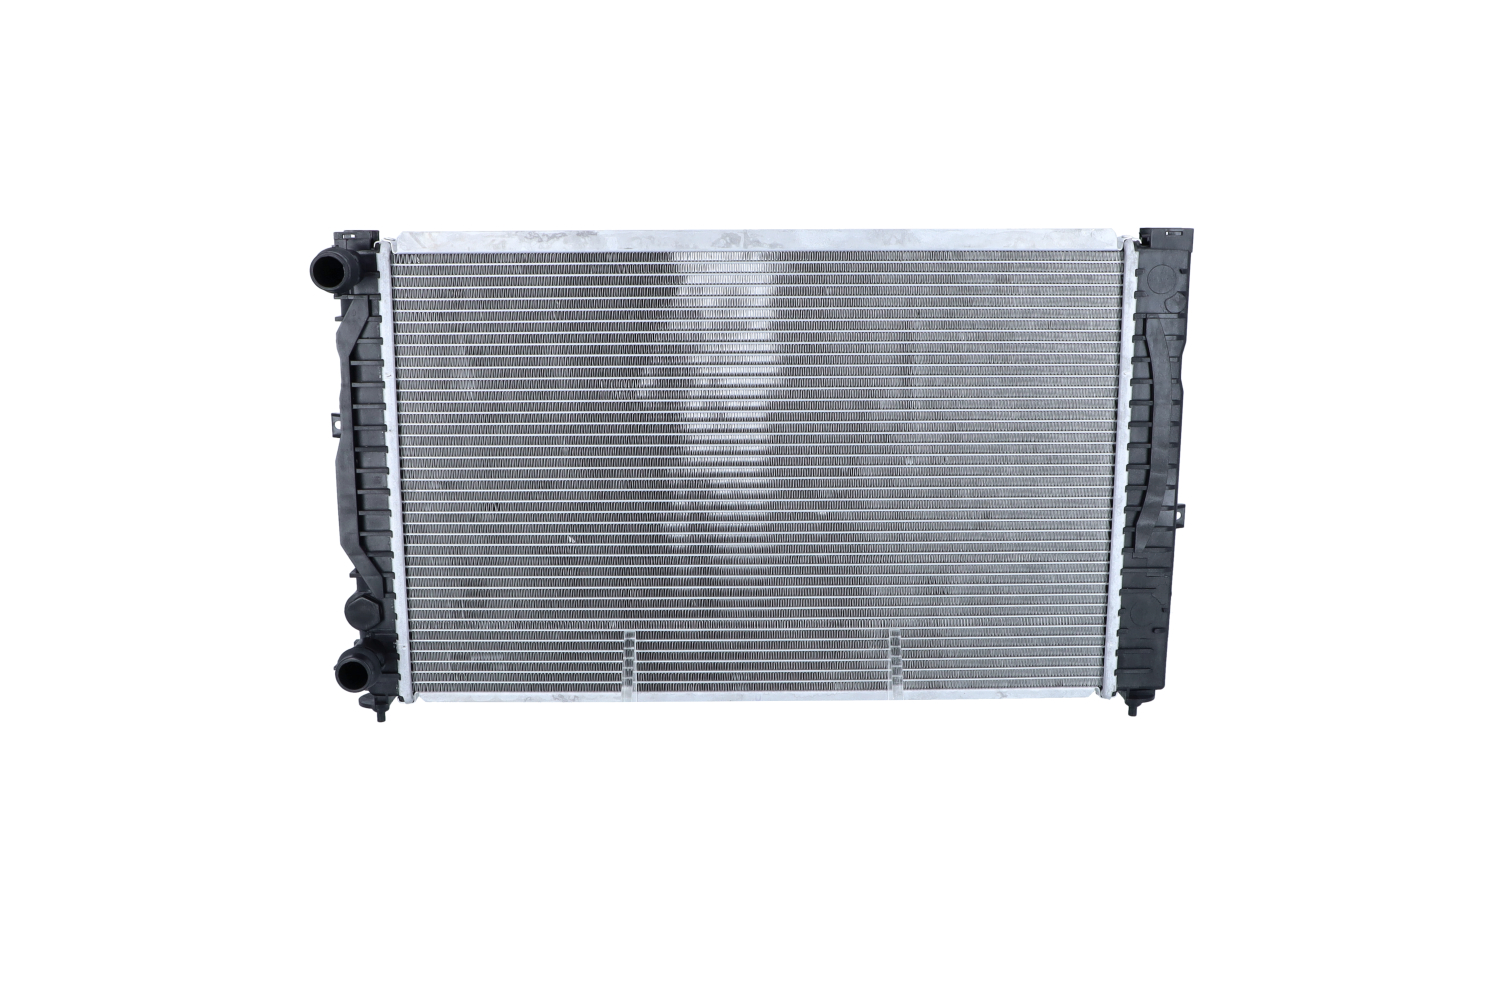 509504 NRF Radiators SKODA Aluminium, 632 x 395 x 33 mm, without sensor, with seal ring, Brazed cooling fins